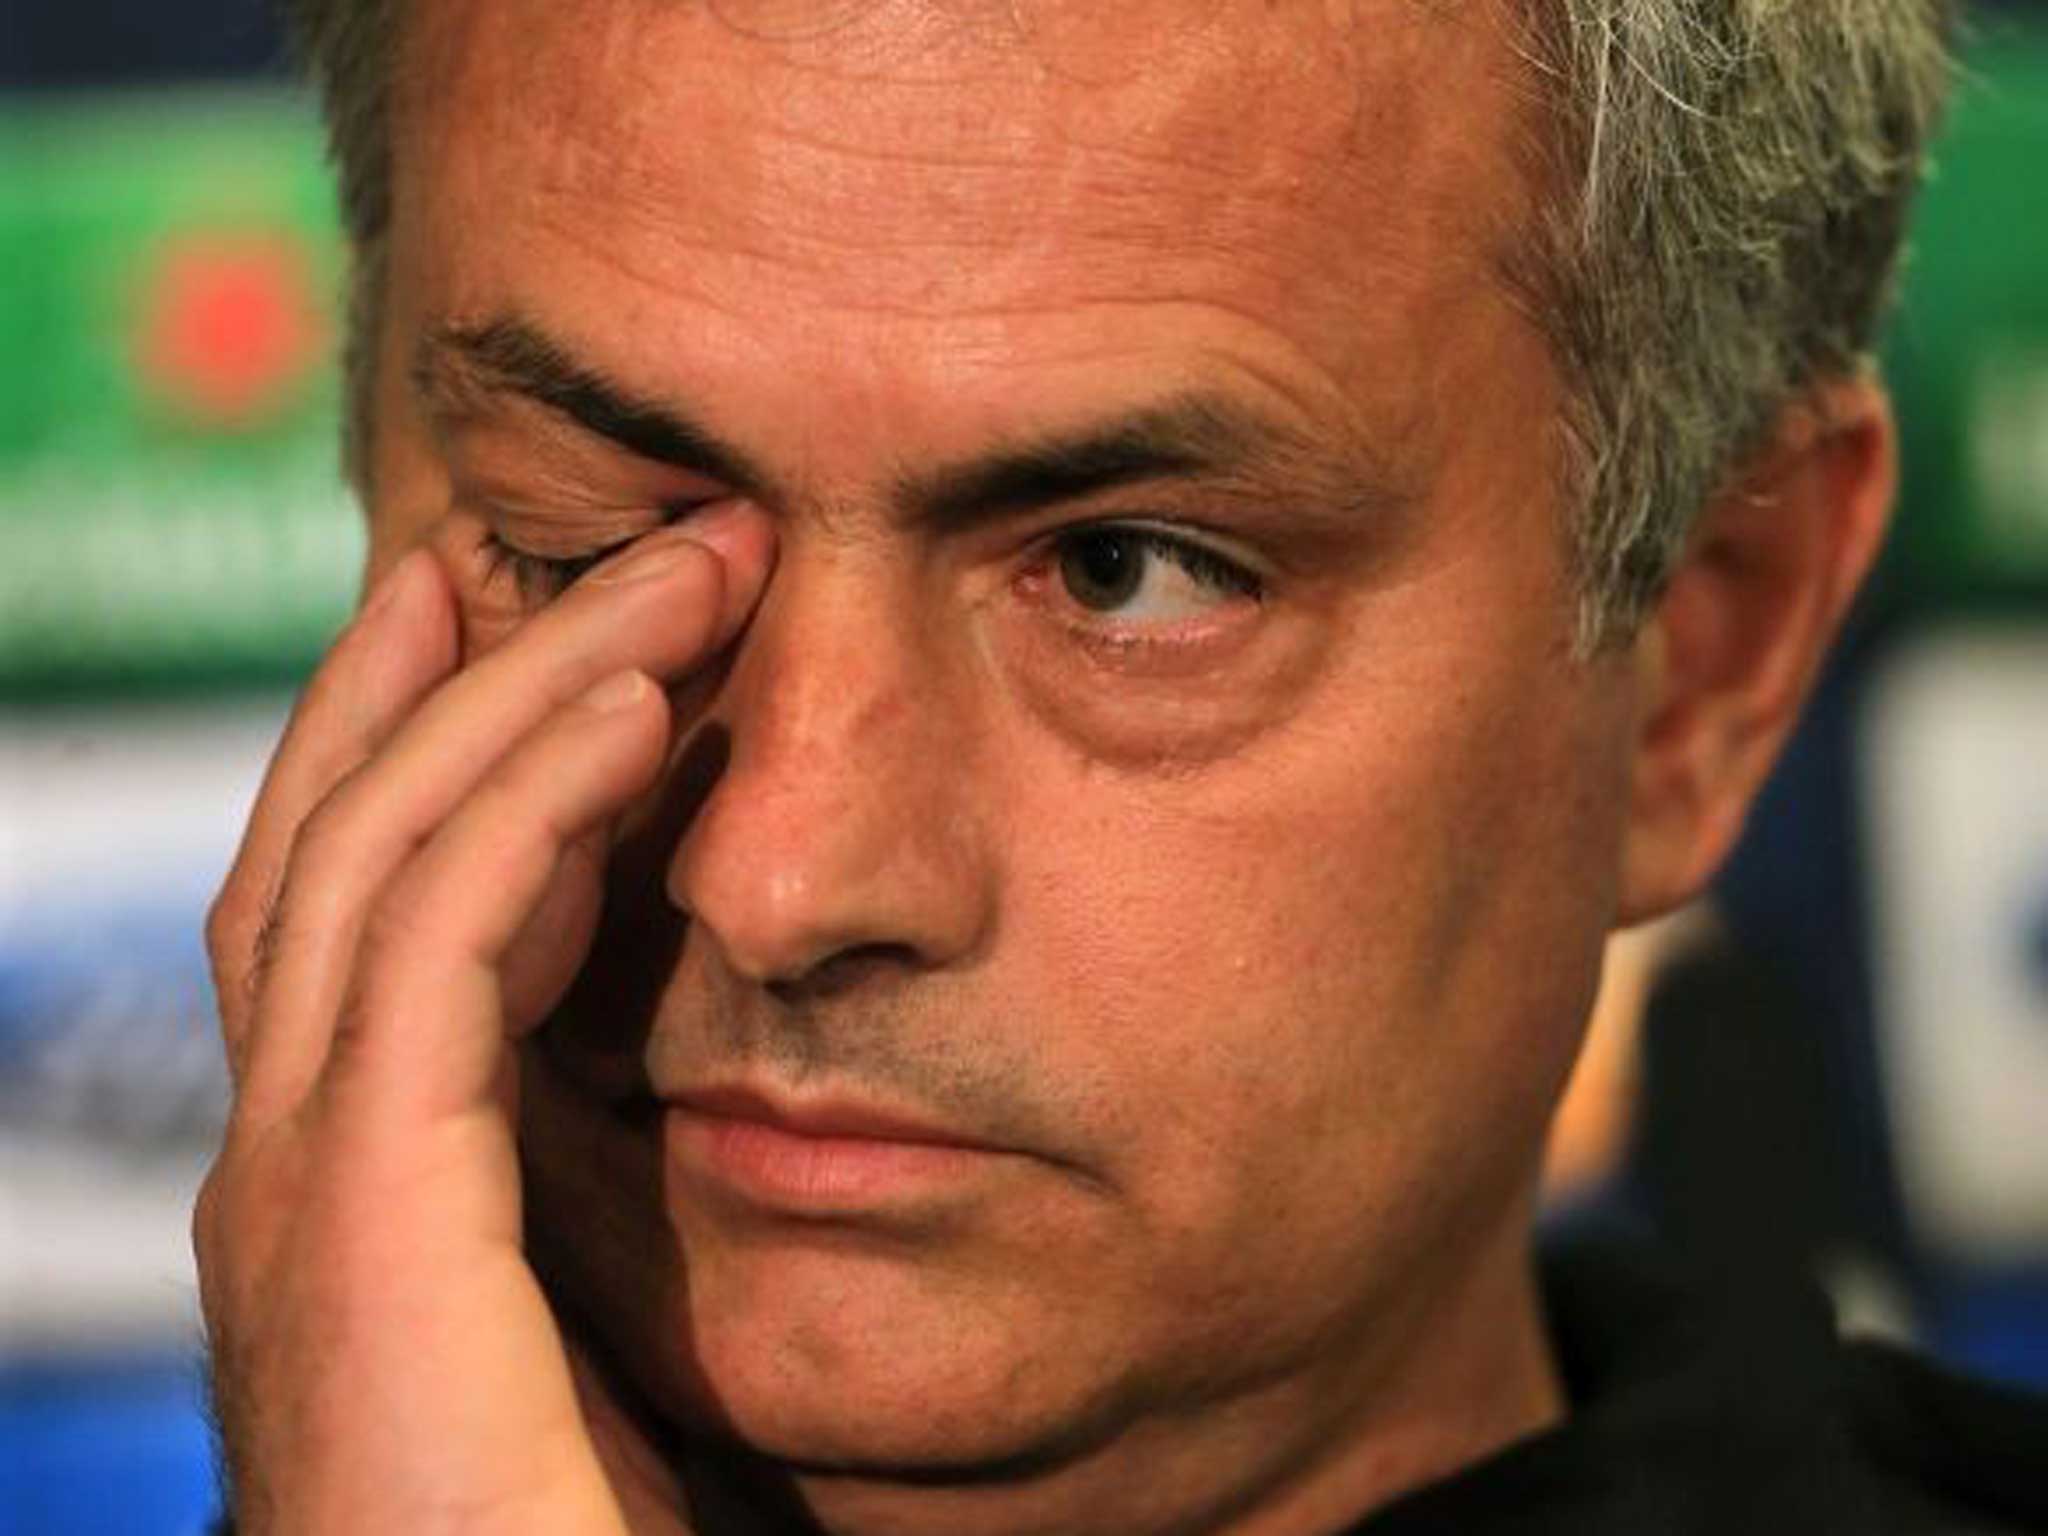 What a winker: There is no nobility in Jose Mourinho’s tiresome posturing